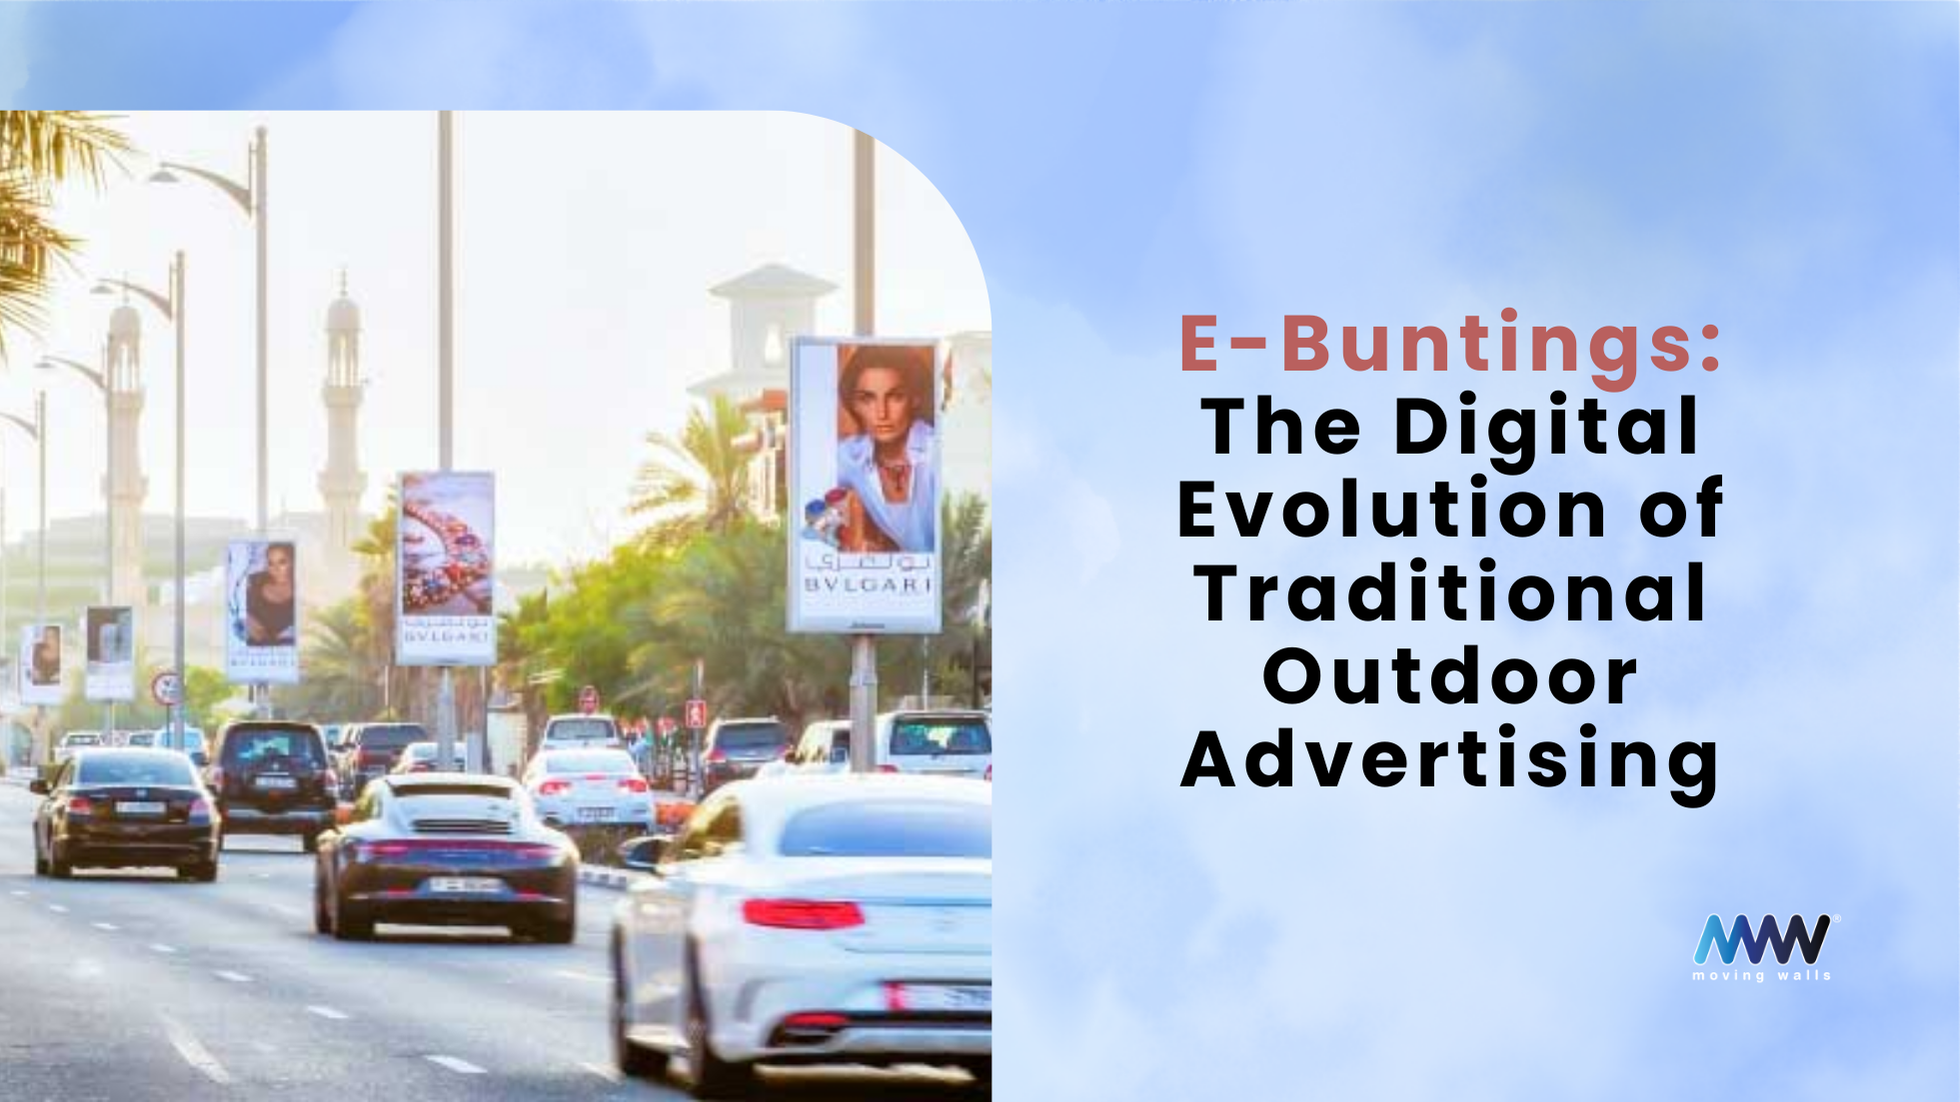 E-Buntings: The Digital Evolution of Traditional Outdoor Advertising